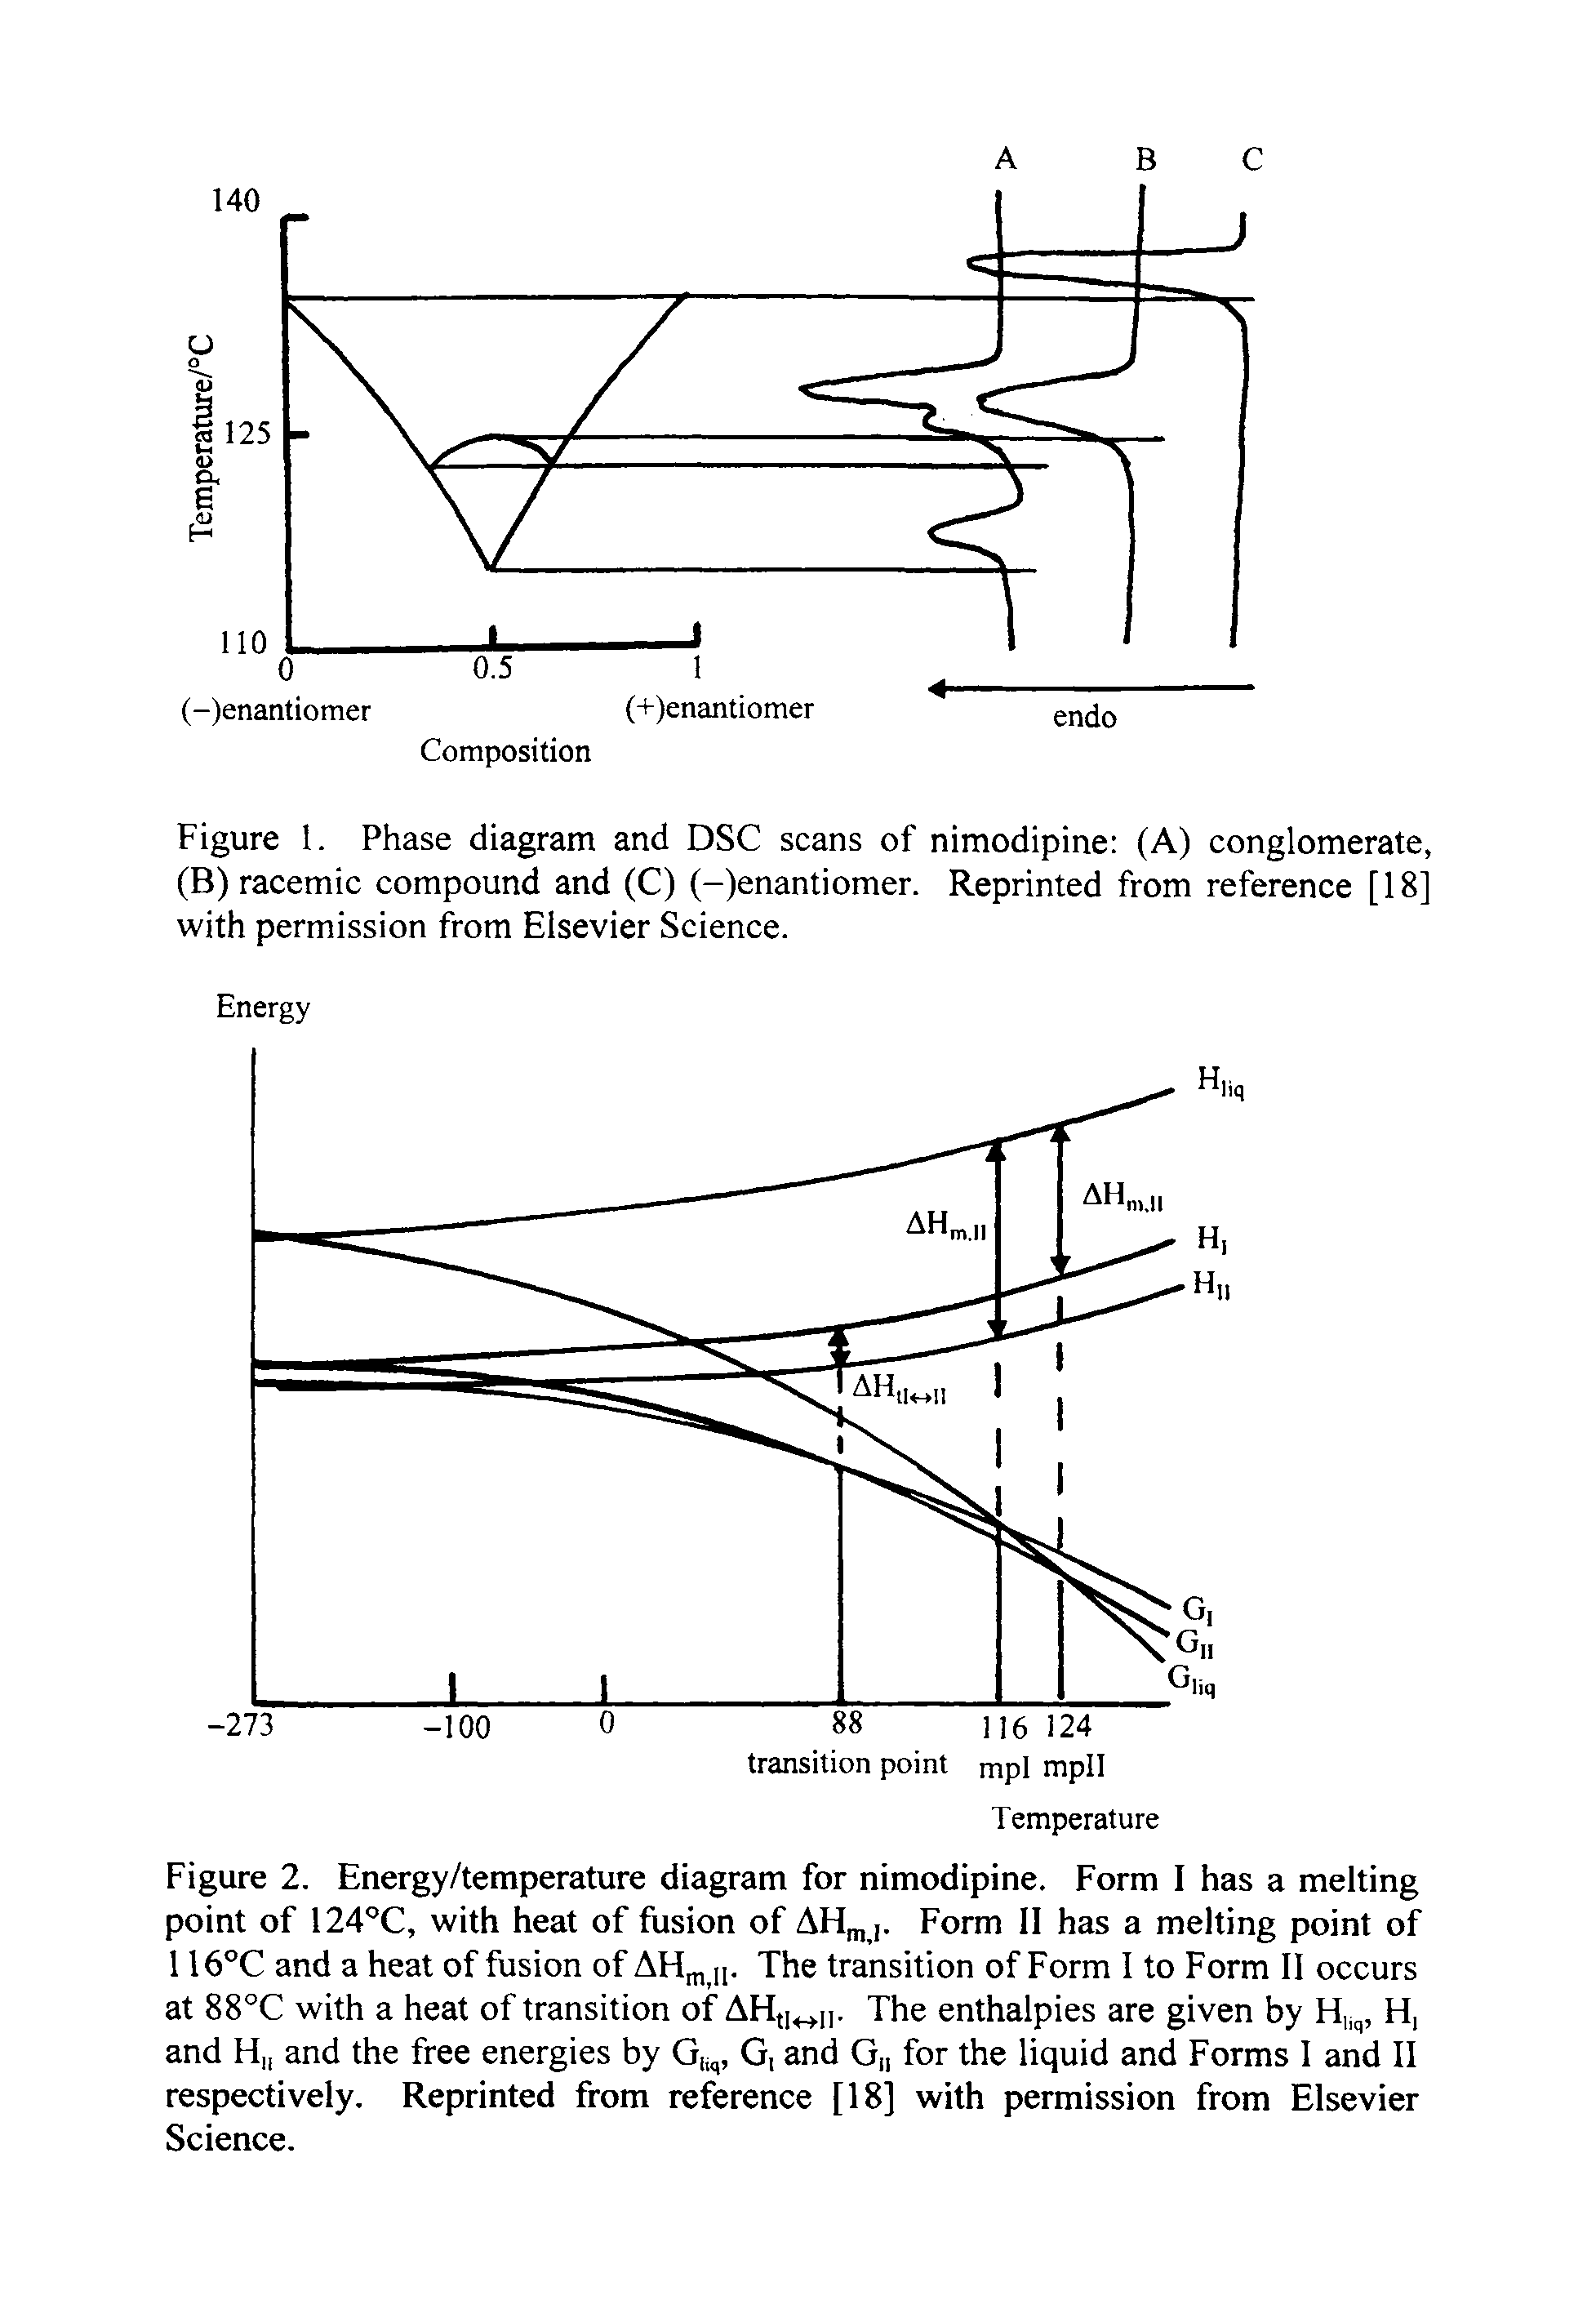 Figure 2. Energy/temperature diagram for nimodipine. Form I has a melting point of 124°C, with heat of fusion of AH, . Form II has a melting point of 116°C and a heat of fusion of AH , n. The transition of Form I to Form II occurs at 88°C with a heat of transition of AHti n- The enthalpies are given by H, and H and the free energies by G j, G, and G, for the liquid and Forms I and II respectively. Reprinted from reference [18] with permission from Elsevier Science.